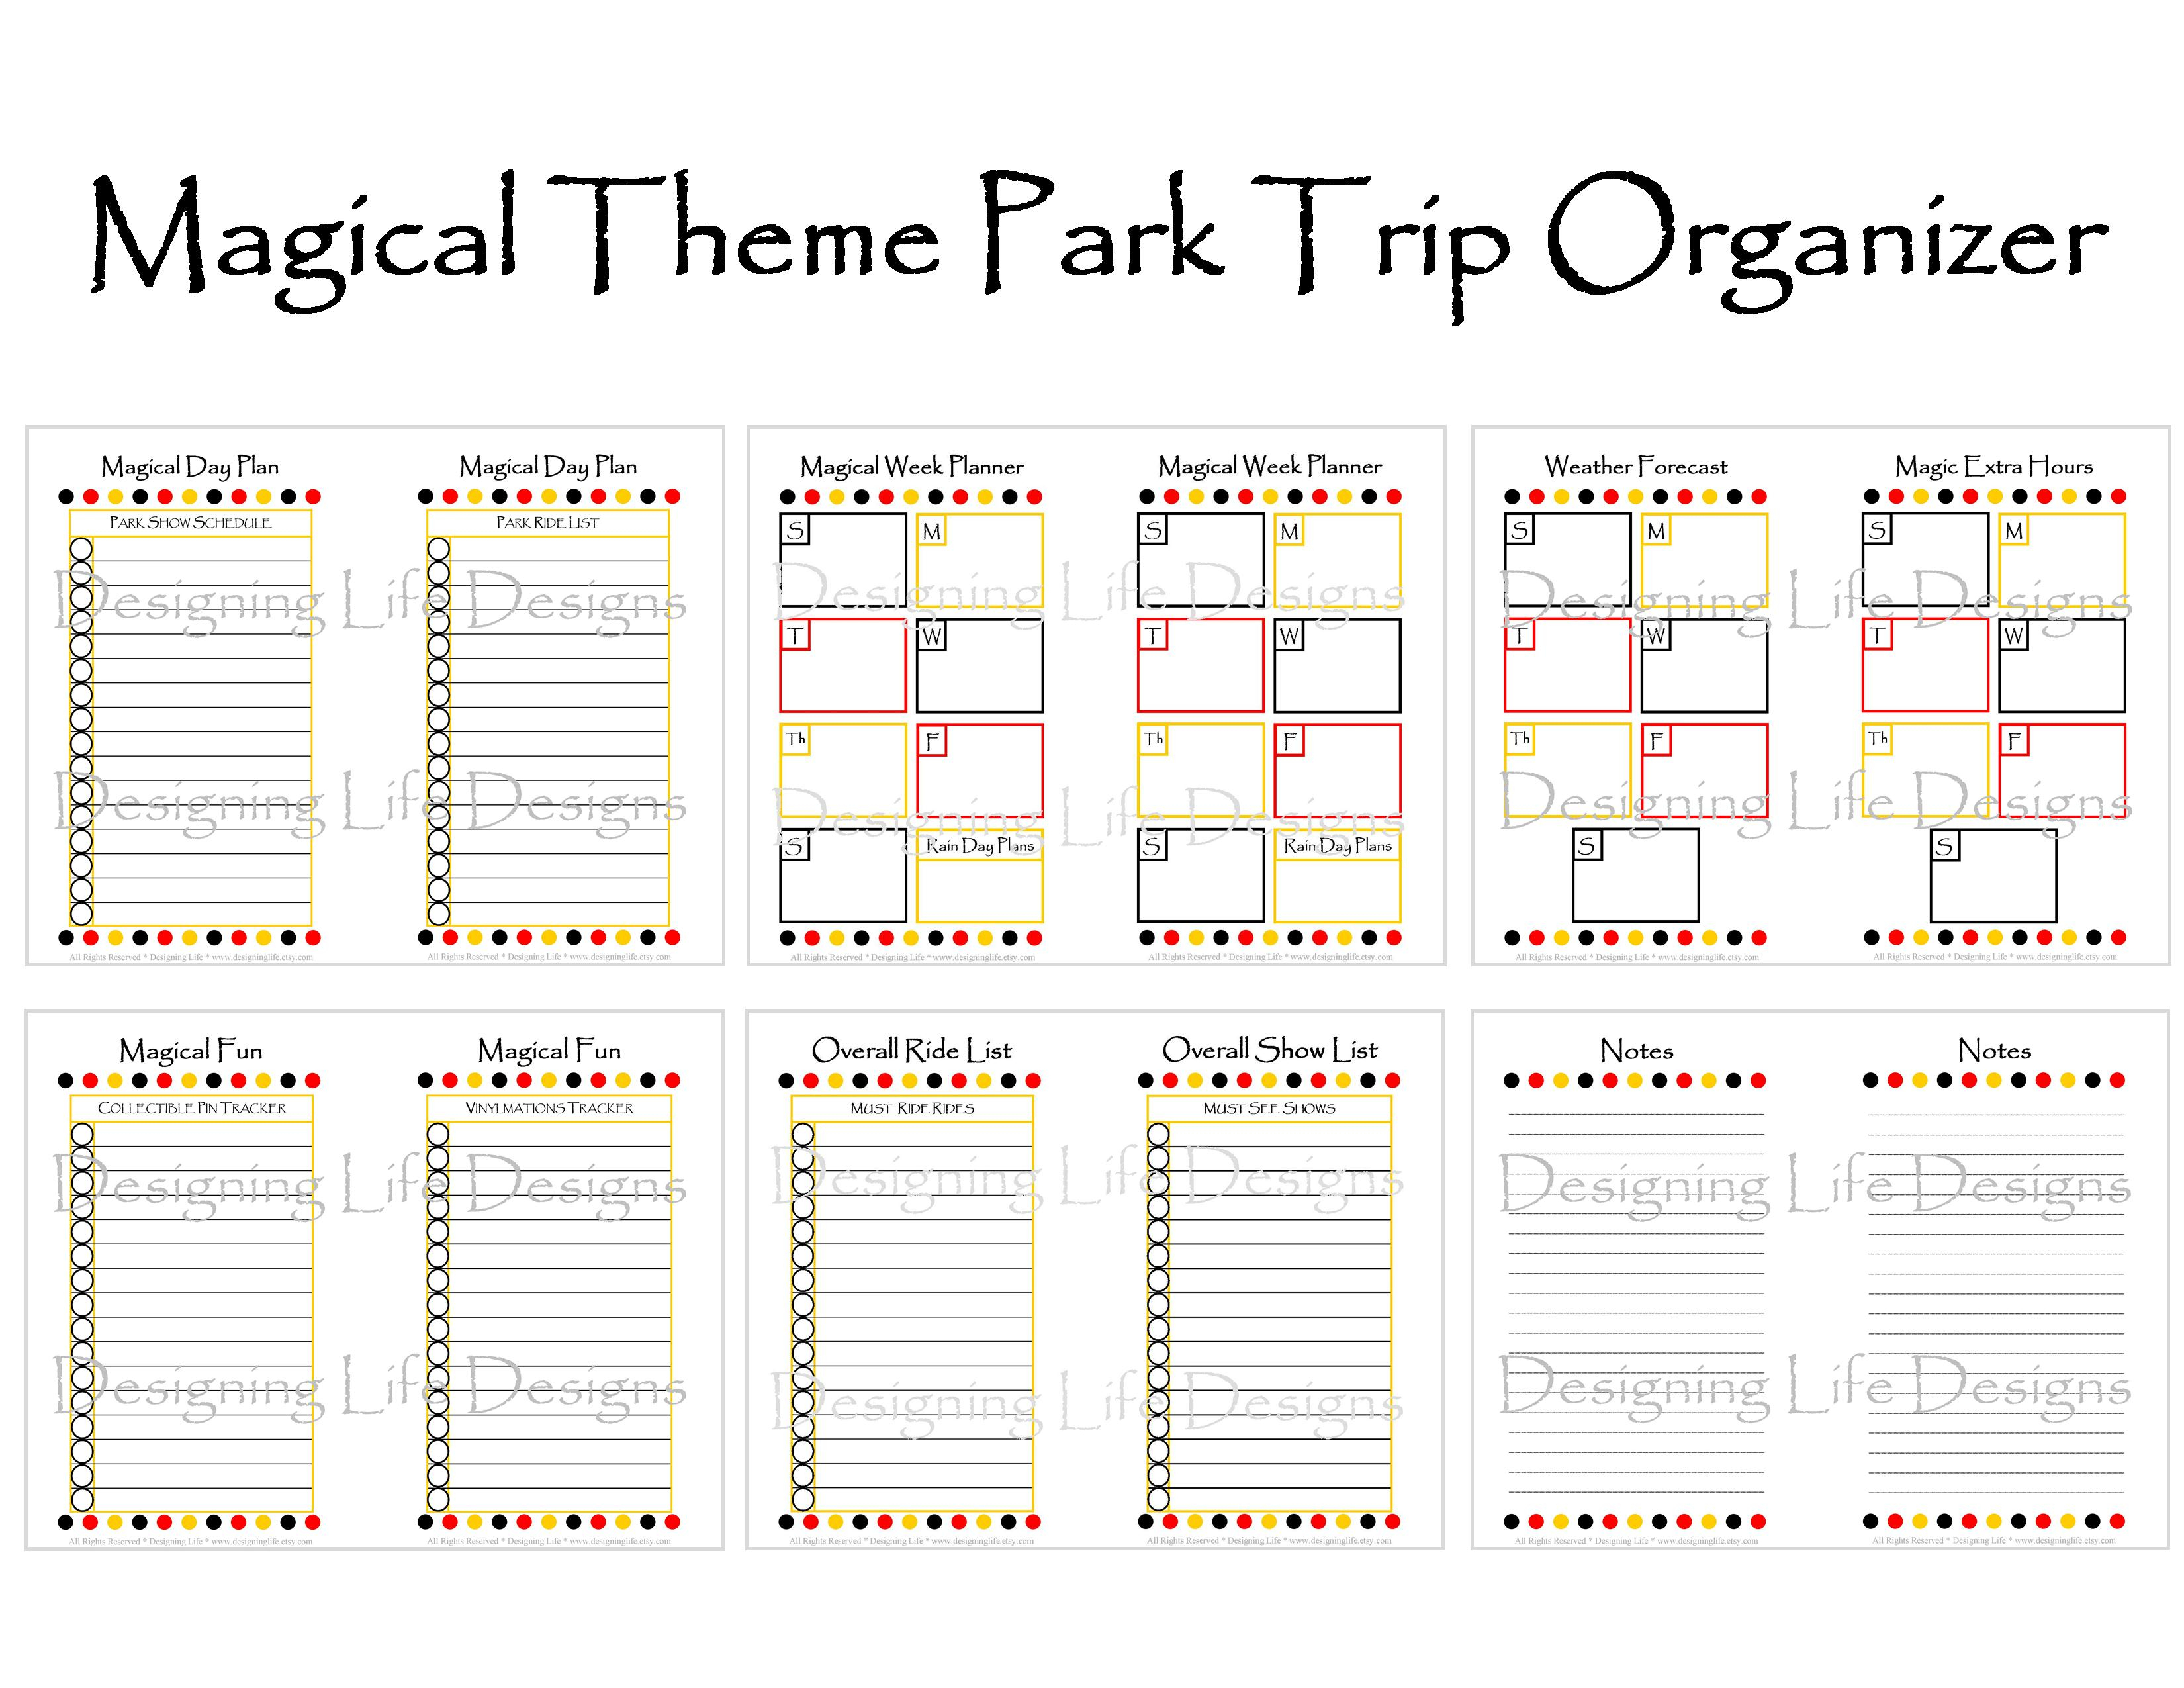 Disney Vacation Planner Template ] - Vacation Planning